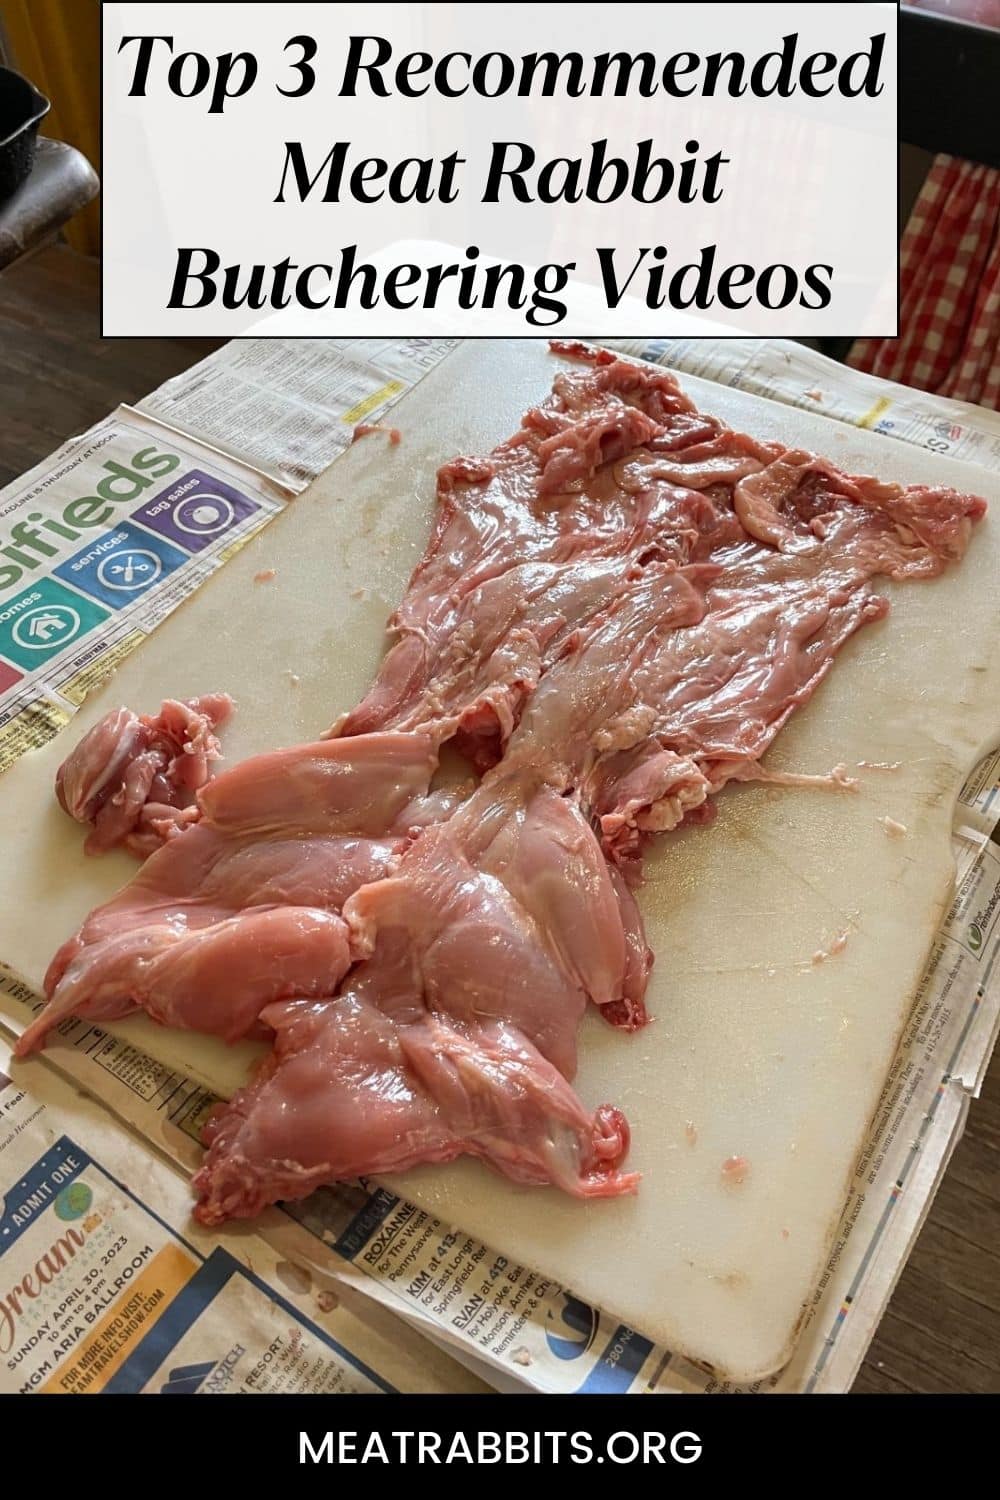 Top 3 Recommended Meat Rabbit Butchering Videos pinterest image.